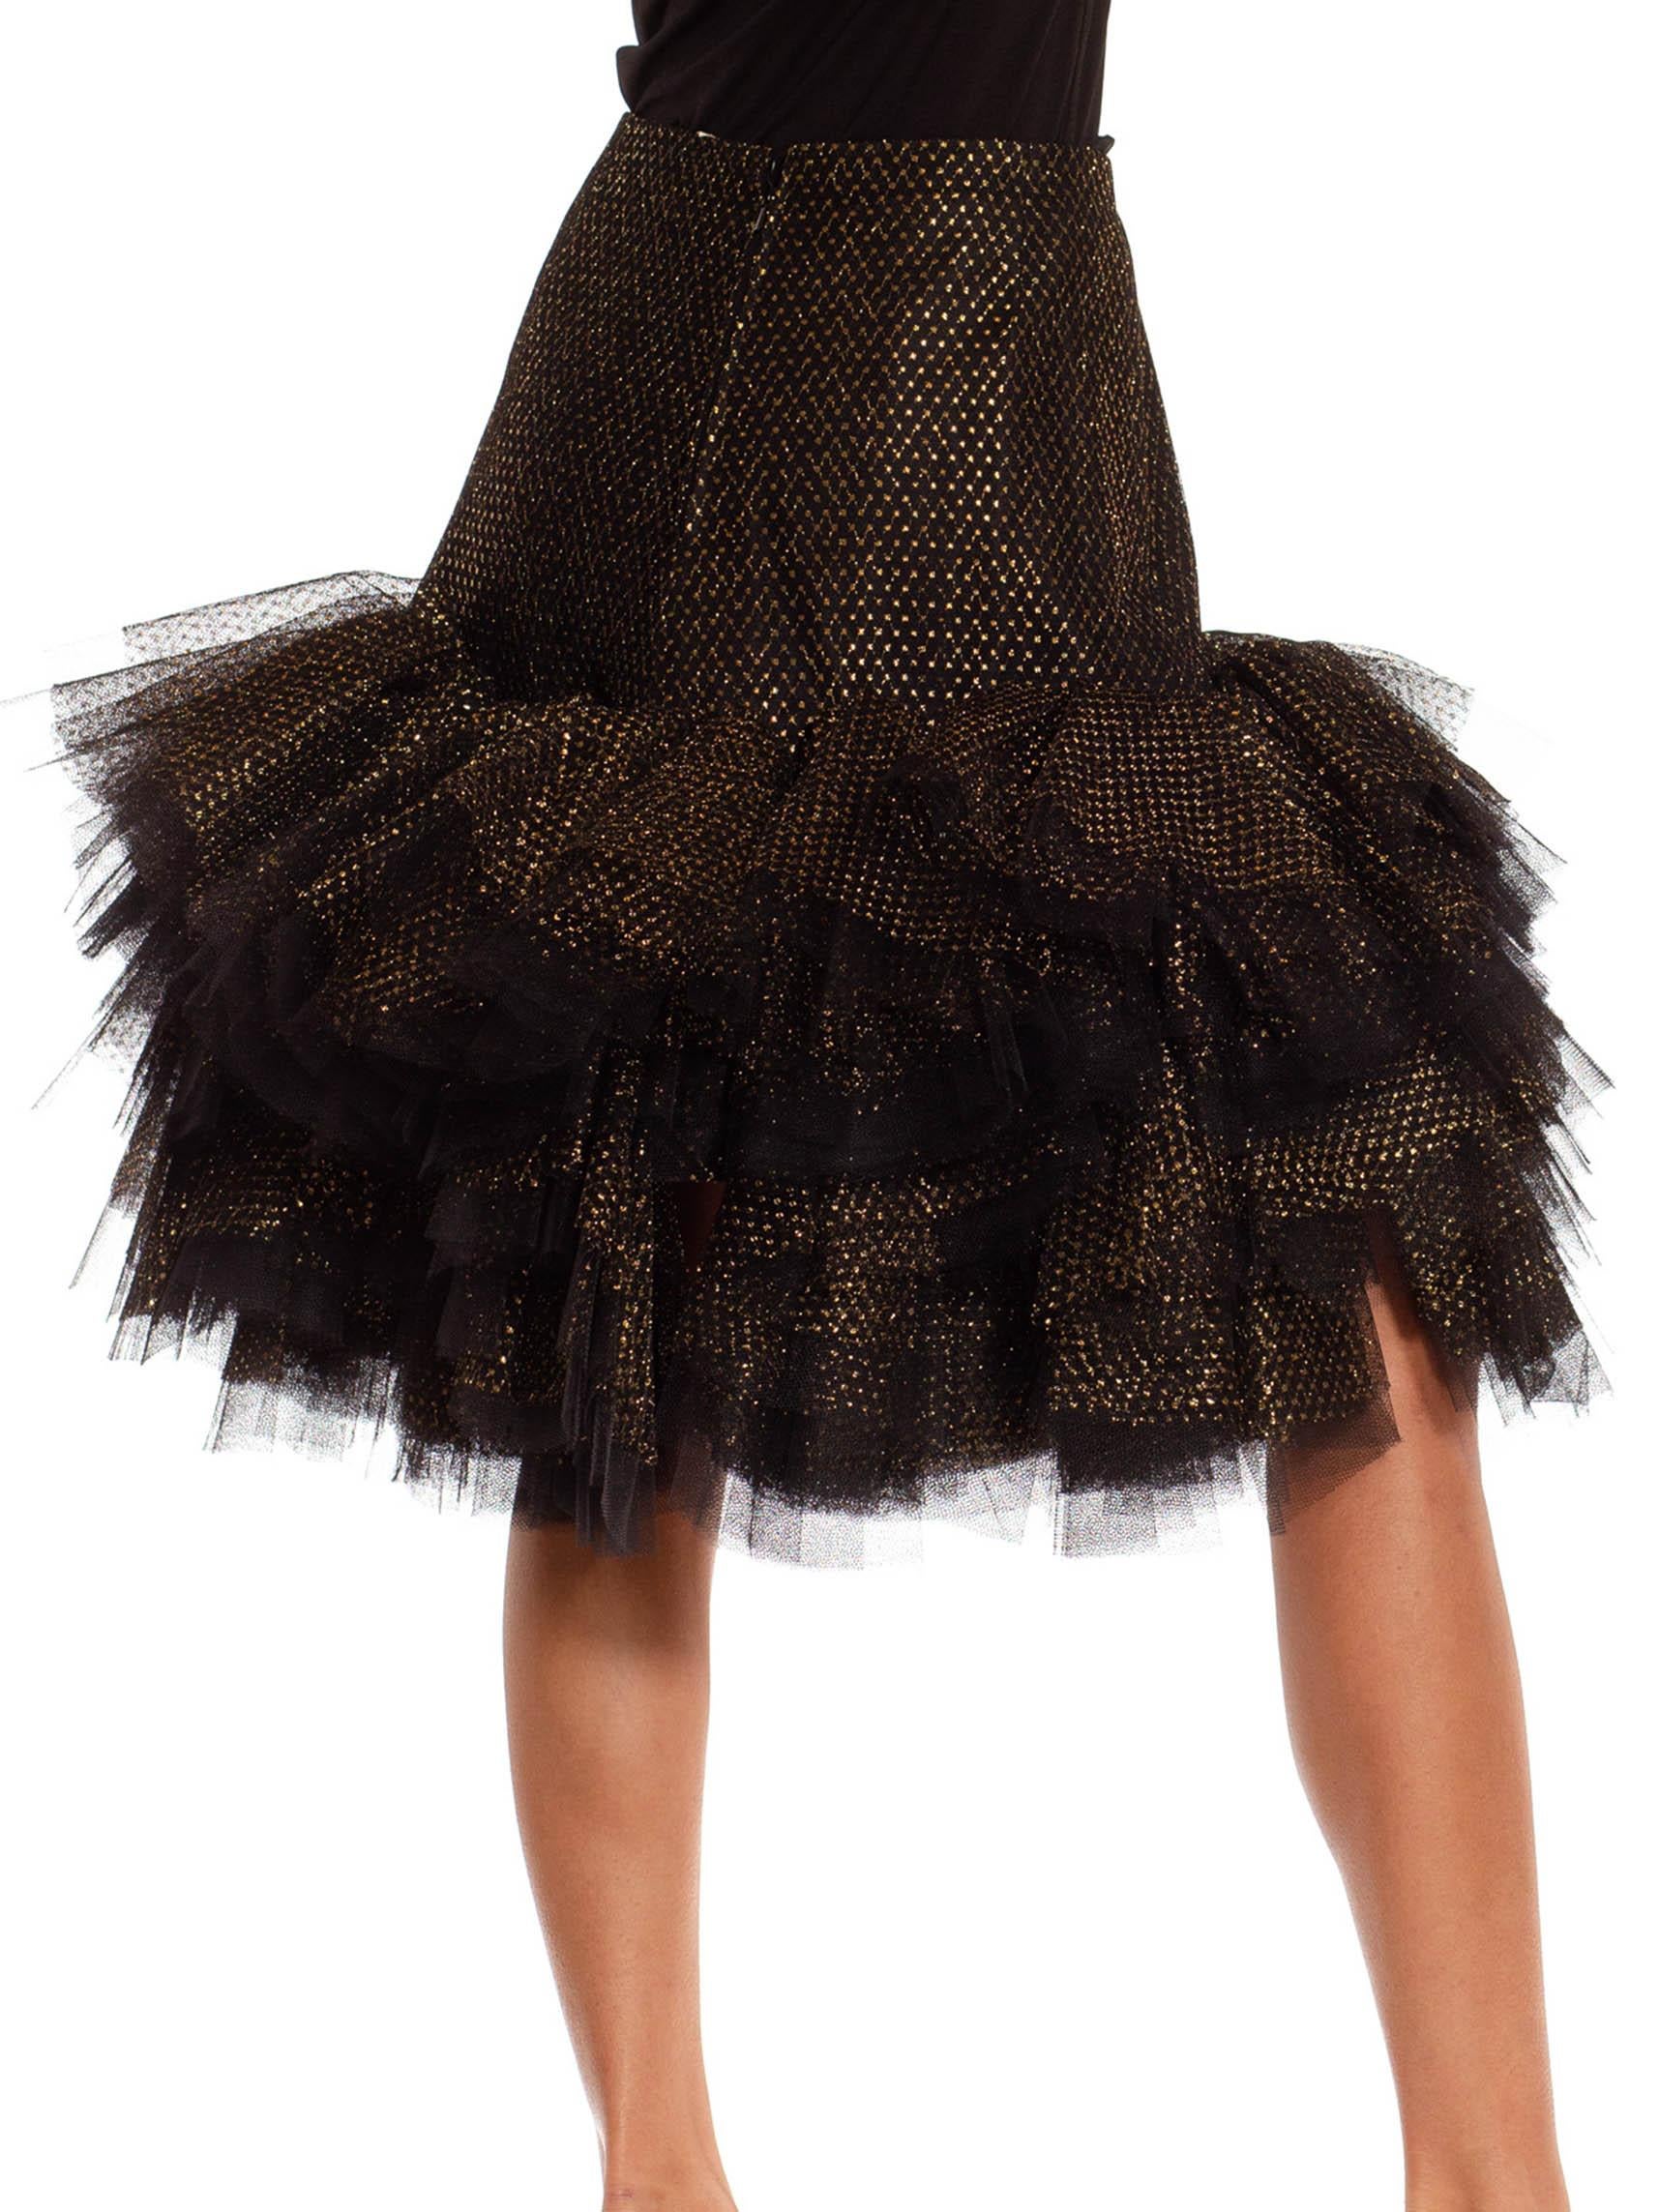 1980S Jacqueline De Ribes Black & Gold Tulle Tiered Polka Dot Skirt For Sale 4